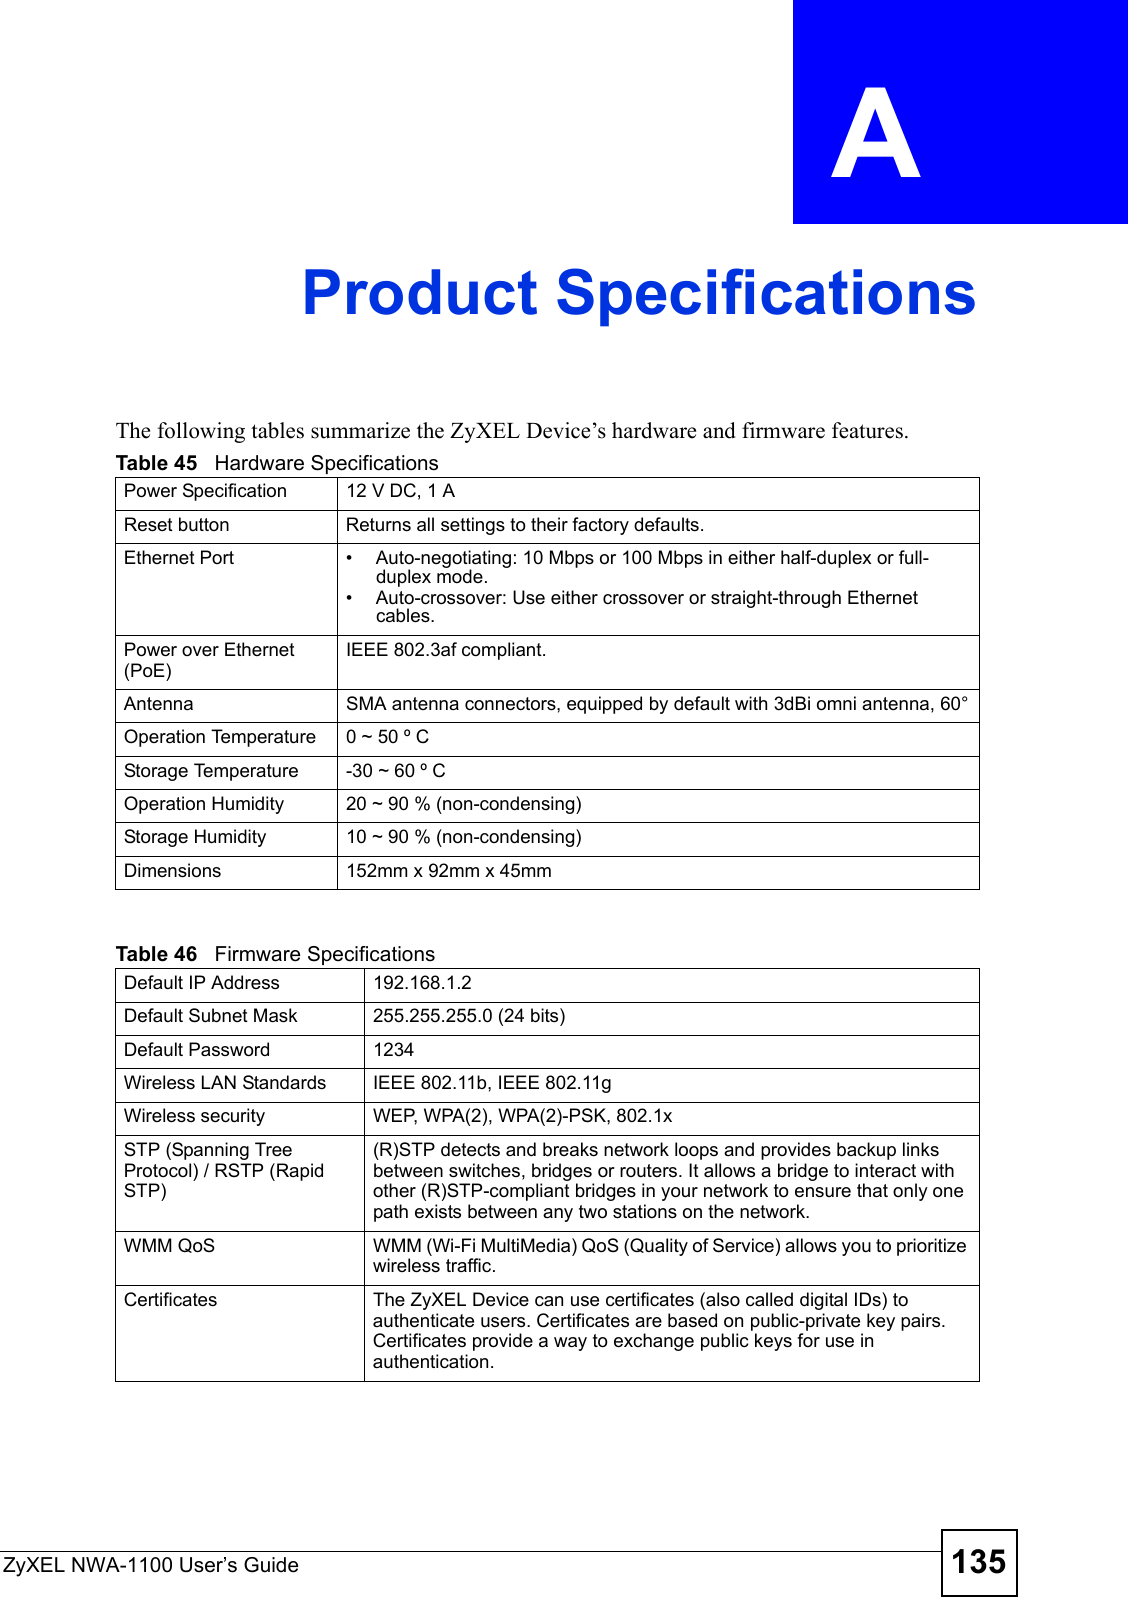 ZyXEL NWA-1100 User’s Guide 135APPENDIX  A Product SpecificationsThe following tables summarize the ZyXEL Device’s hardware and firmware features.Table 45   Hardware SpecificationsPower Specification 12 V DC, 1 AReset button Returns all settings to their factory defaults.Ethernet Port • Auto-negotiating: 10 Mbps or 100 Mbps in either half-duplex or full-duplex mode.• Auto-crossover: Use either crossover or straight-through Ethernet cables.Power over Ethernet (PoE)IEEE 802.3af compliant.Antenna SMA antenna connectors, equipped by default with 3dBi omni antenna, 60°Operation Temperature 0 ~ 50 º CStorage Temperature -30 ~ 60 º COperation Humidity 20 ~ 90 % (non-condensing)Storage Humidity 10 ~ 90 % (non-condensing)Dimensions  152mm x 92mm x 45mmTable 46   Firmware Specifications Default IP Address 192.168.1.2Default Subnet Mask 255.255.255.0 (24 bits)Default Password 1234Wireless LAN Standards IEEE 802.11b, IEEE 802.11gWireless security WEP, WPA(2), WPA(2)-PSK, 802.1xSTP (Spanning Tree Protocol) / RSTP (Rapid STP)(R)STP detects and breaks network loops and provides backup links between switches, bridges or routers. It allows a bridge to interact with other (R)STP-compliant bridges in your network to ensure that only one path exists between any two stations on the network.WMM QoS WMM (Wi-Fi MultiMedia) QoS (Quality of Service) allows you to prioritize wireless traffic. Certificates The ZyXEL Device can use certificates (also called digital IDs) to authenticate users. Certificates are based on public-private key pairs. Certificates provide a way to exchange public keys for use in authentication.